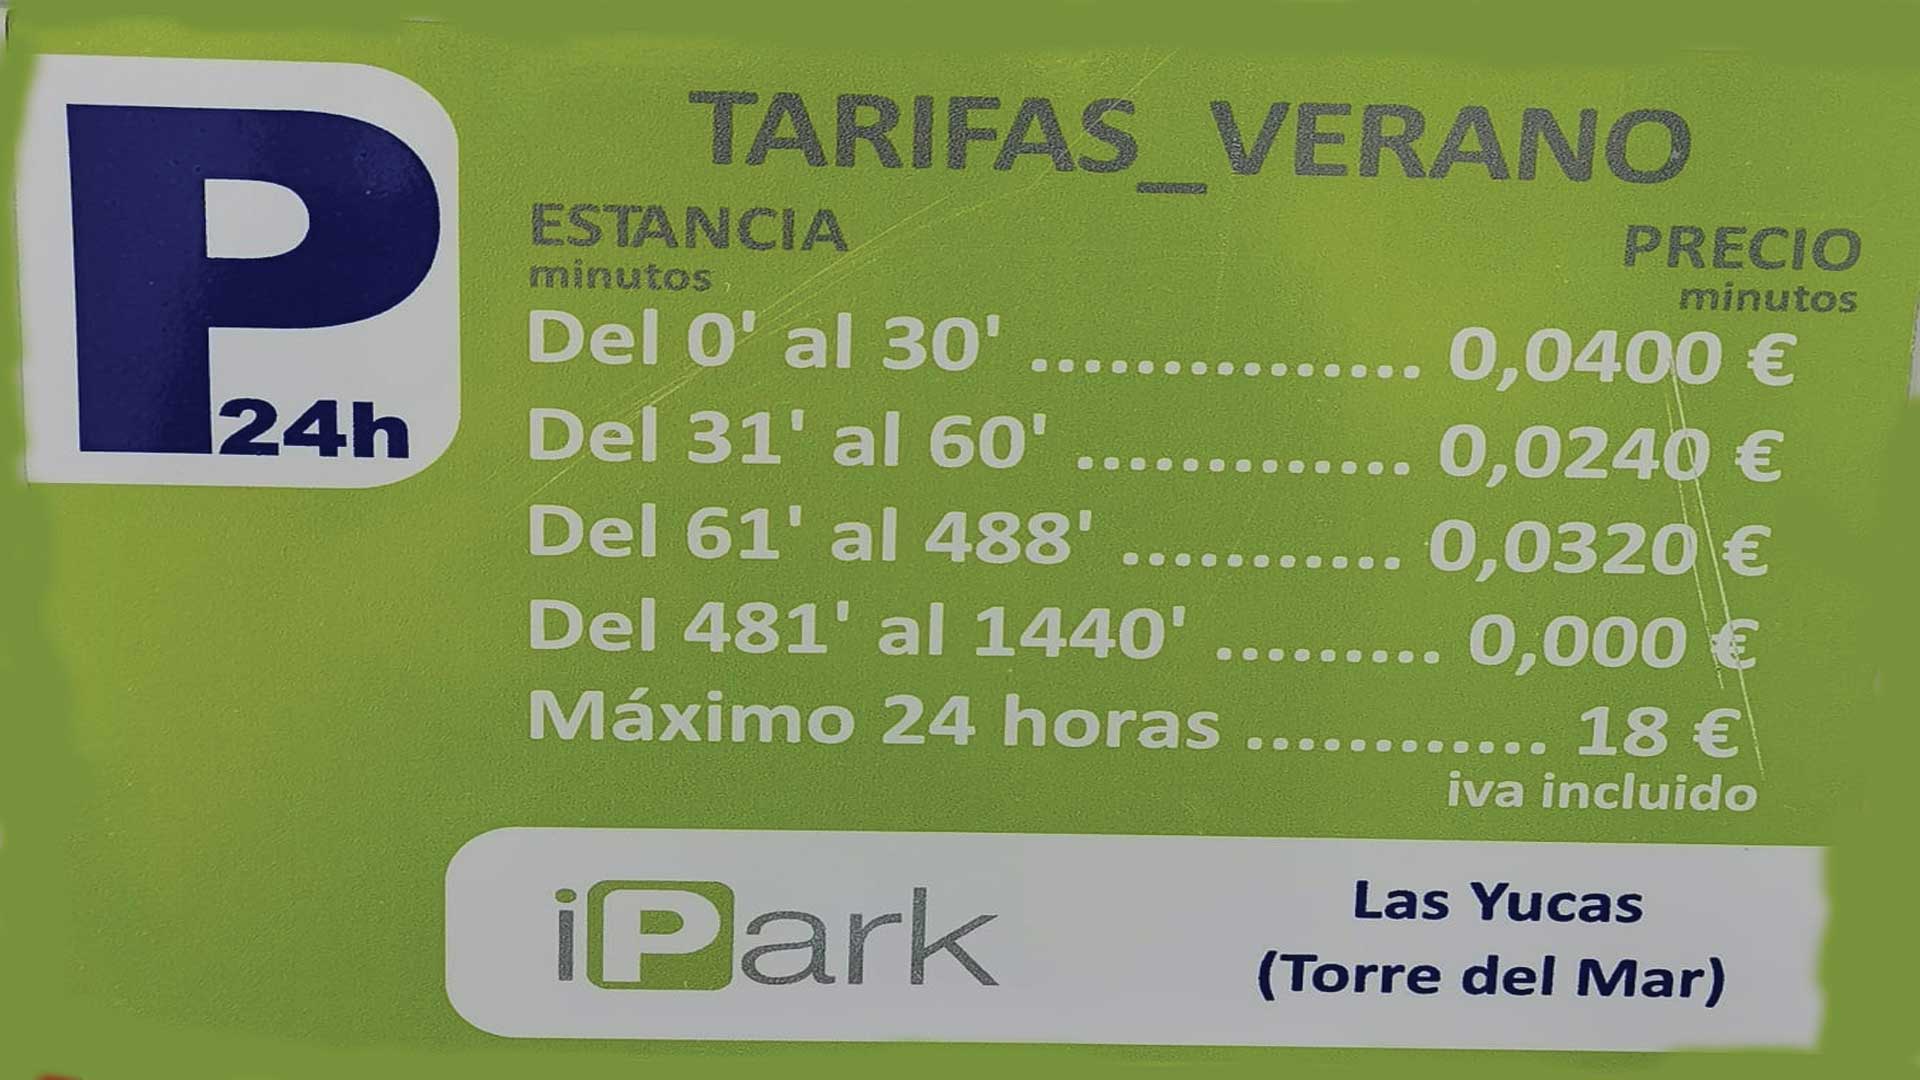 Parking, Torre del Mar, Pay to park, Parking Spaces Available,